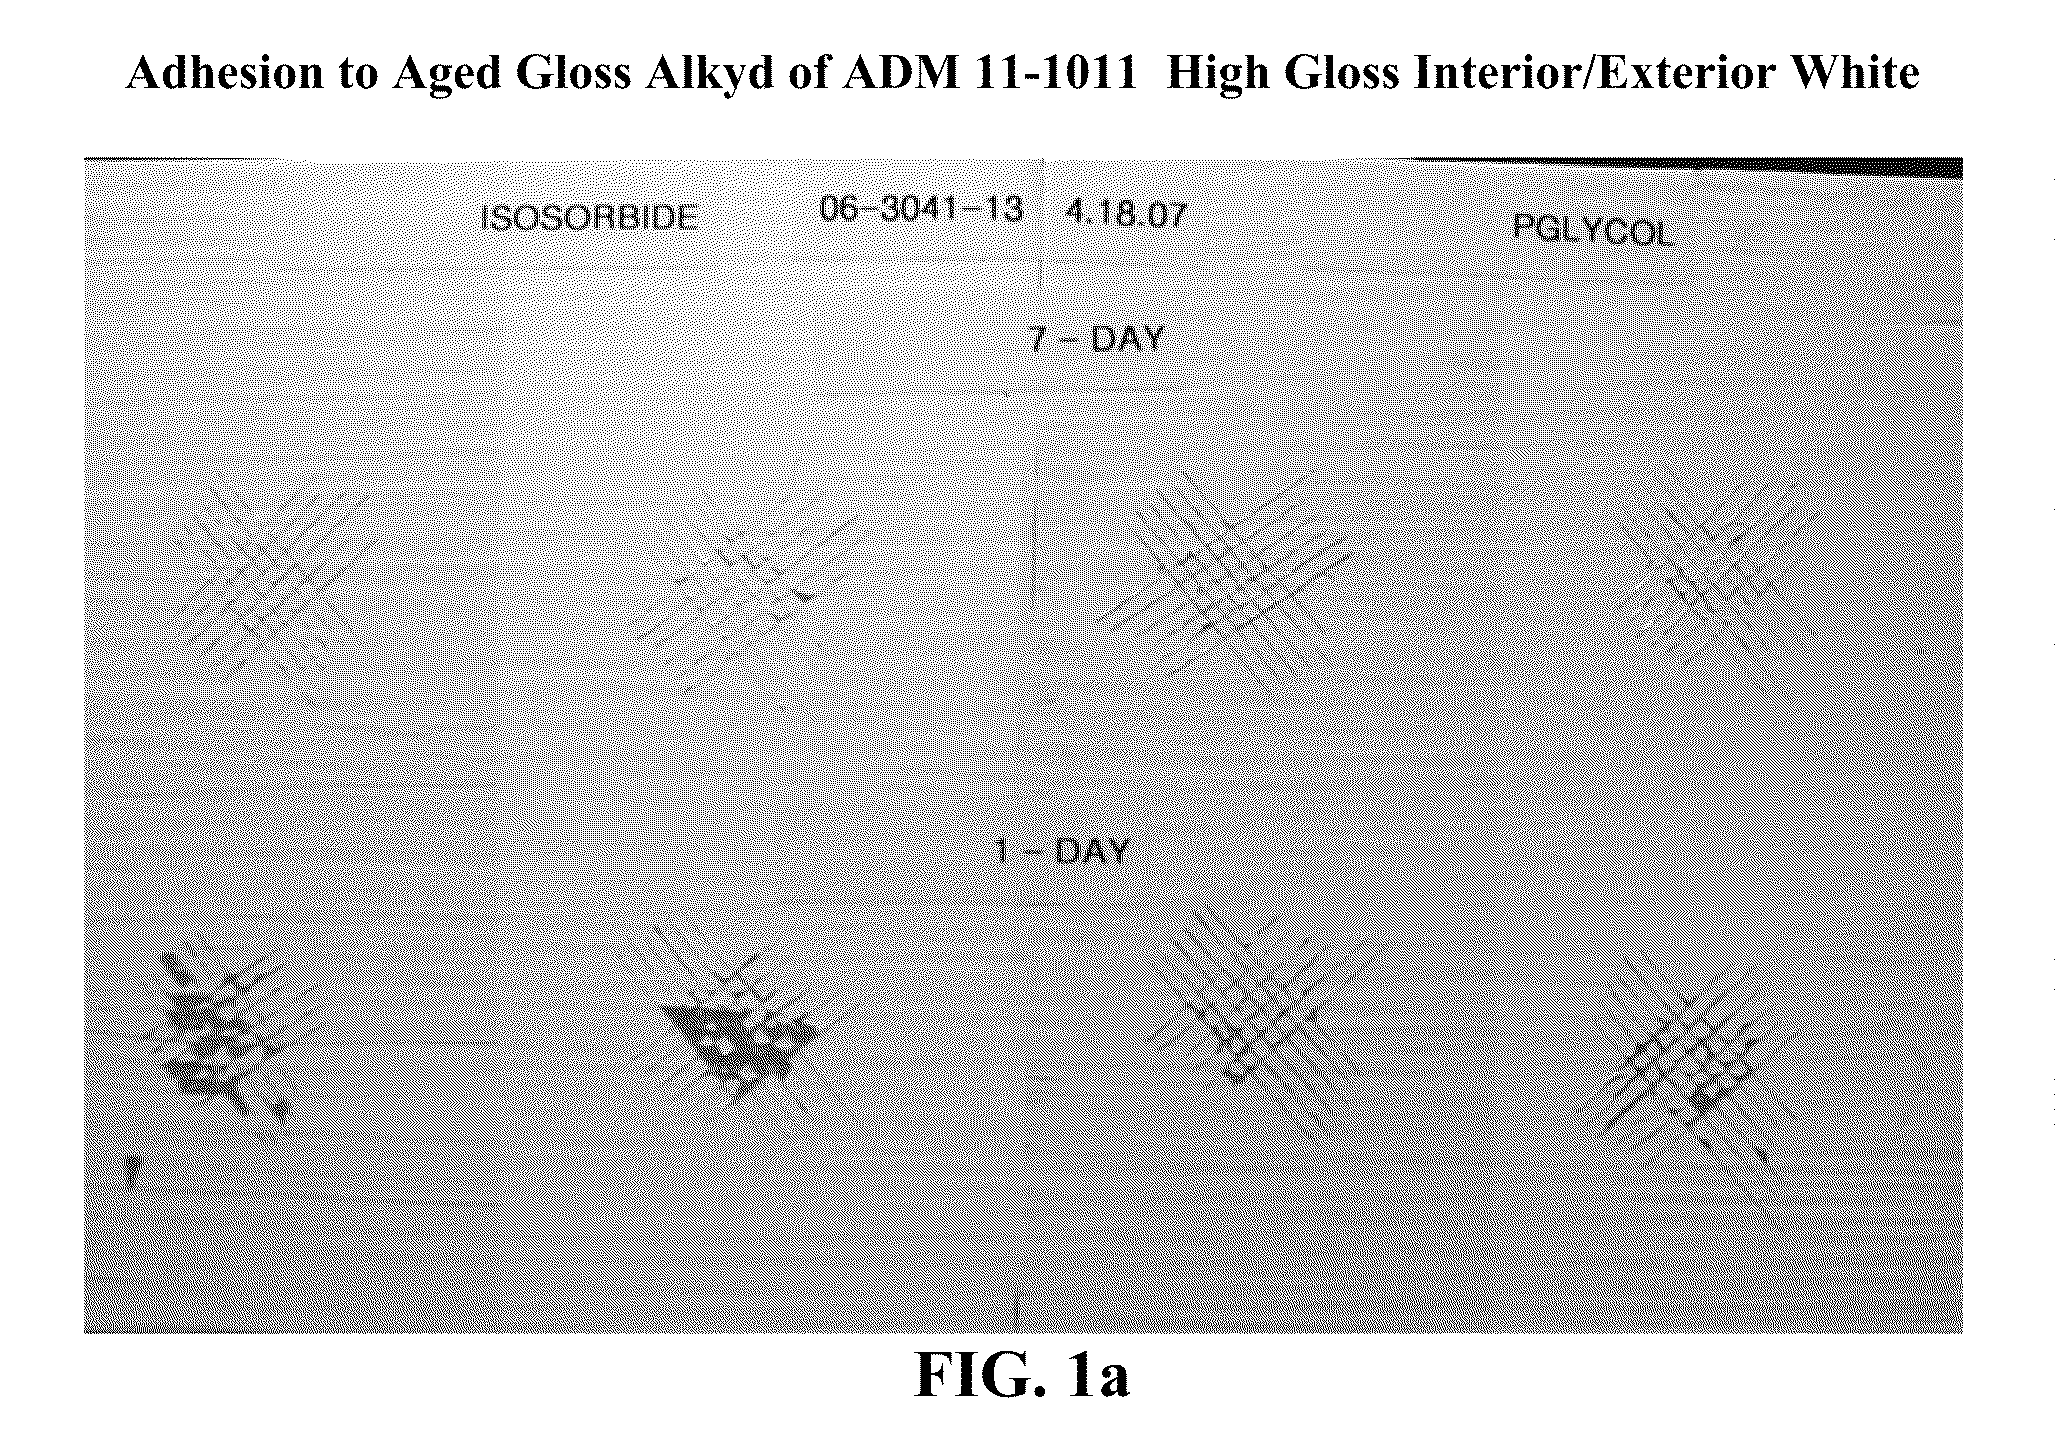 Waterborne Film-Forming Compositions Containing Reactive Surfactants and/or Humectants